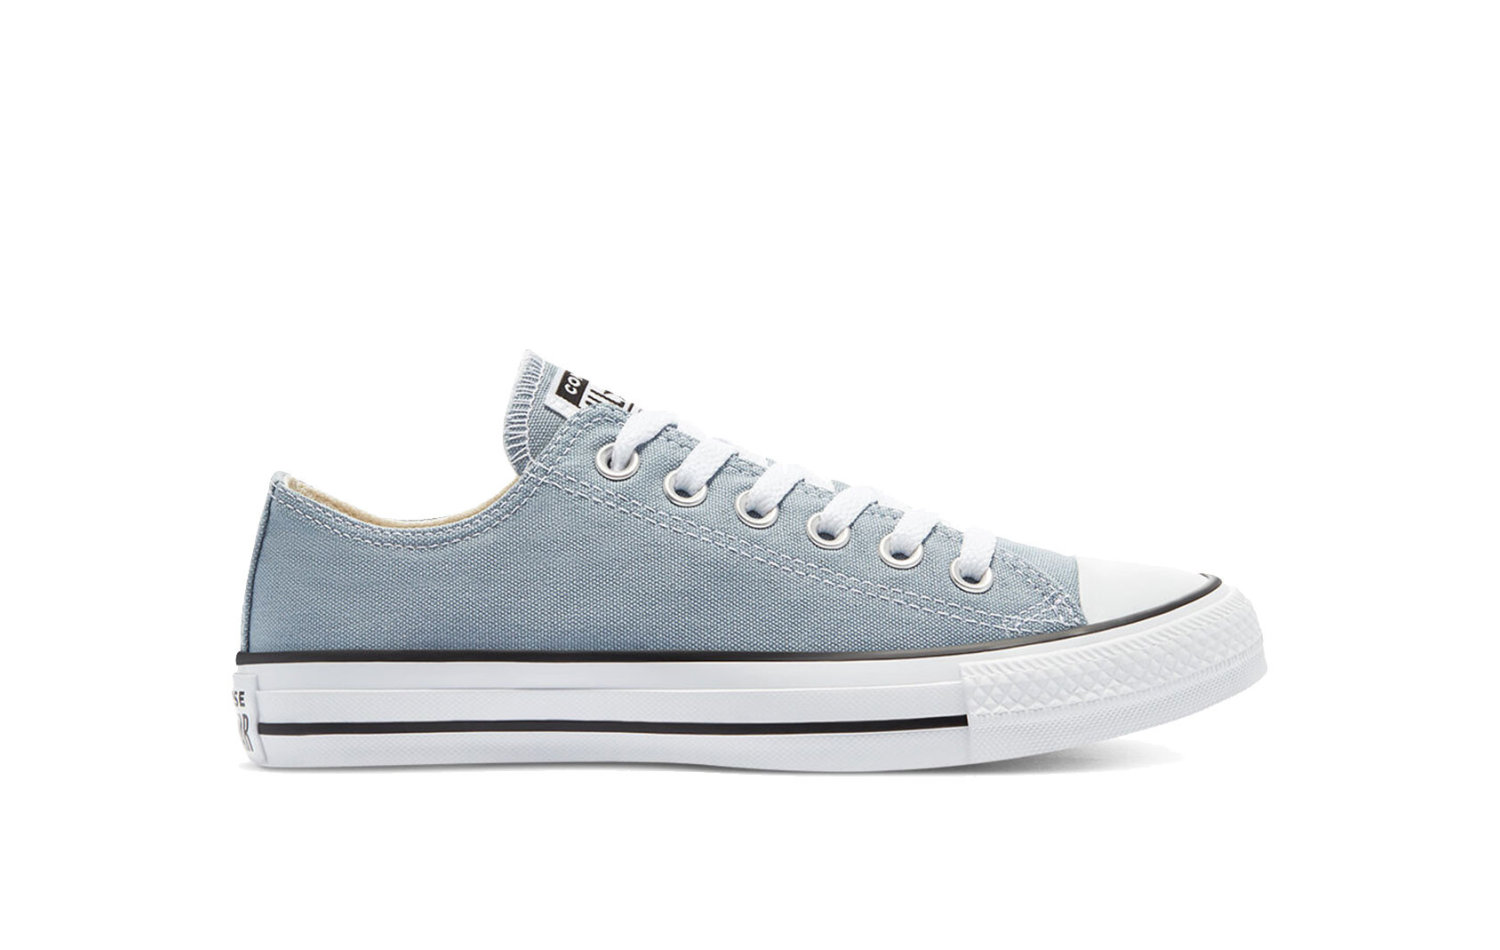 Converse Ct All Star Ox (170466C)